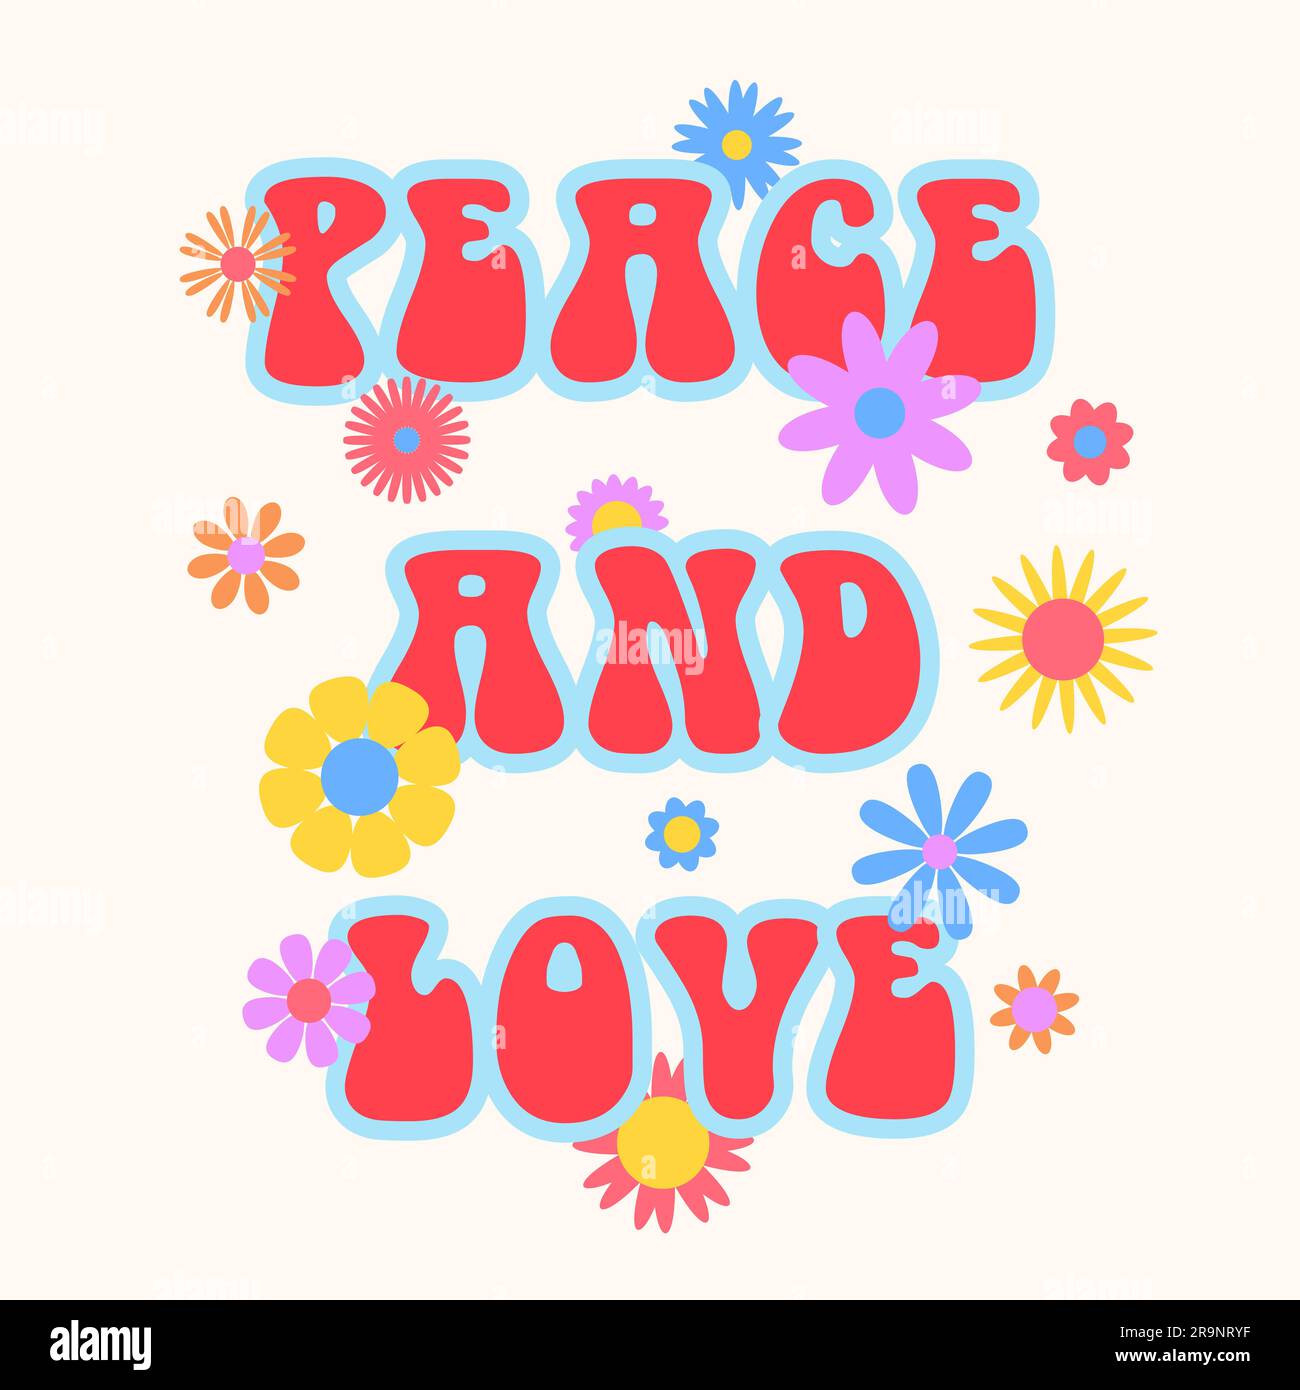 Vector trendy funny abstract retro 60s, 70s hippie groovy illustration Peace and Love with flowers for fashion art print, poster or card Stock Vector